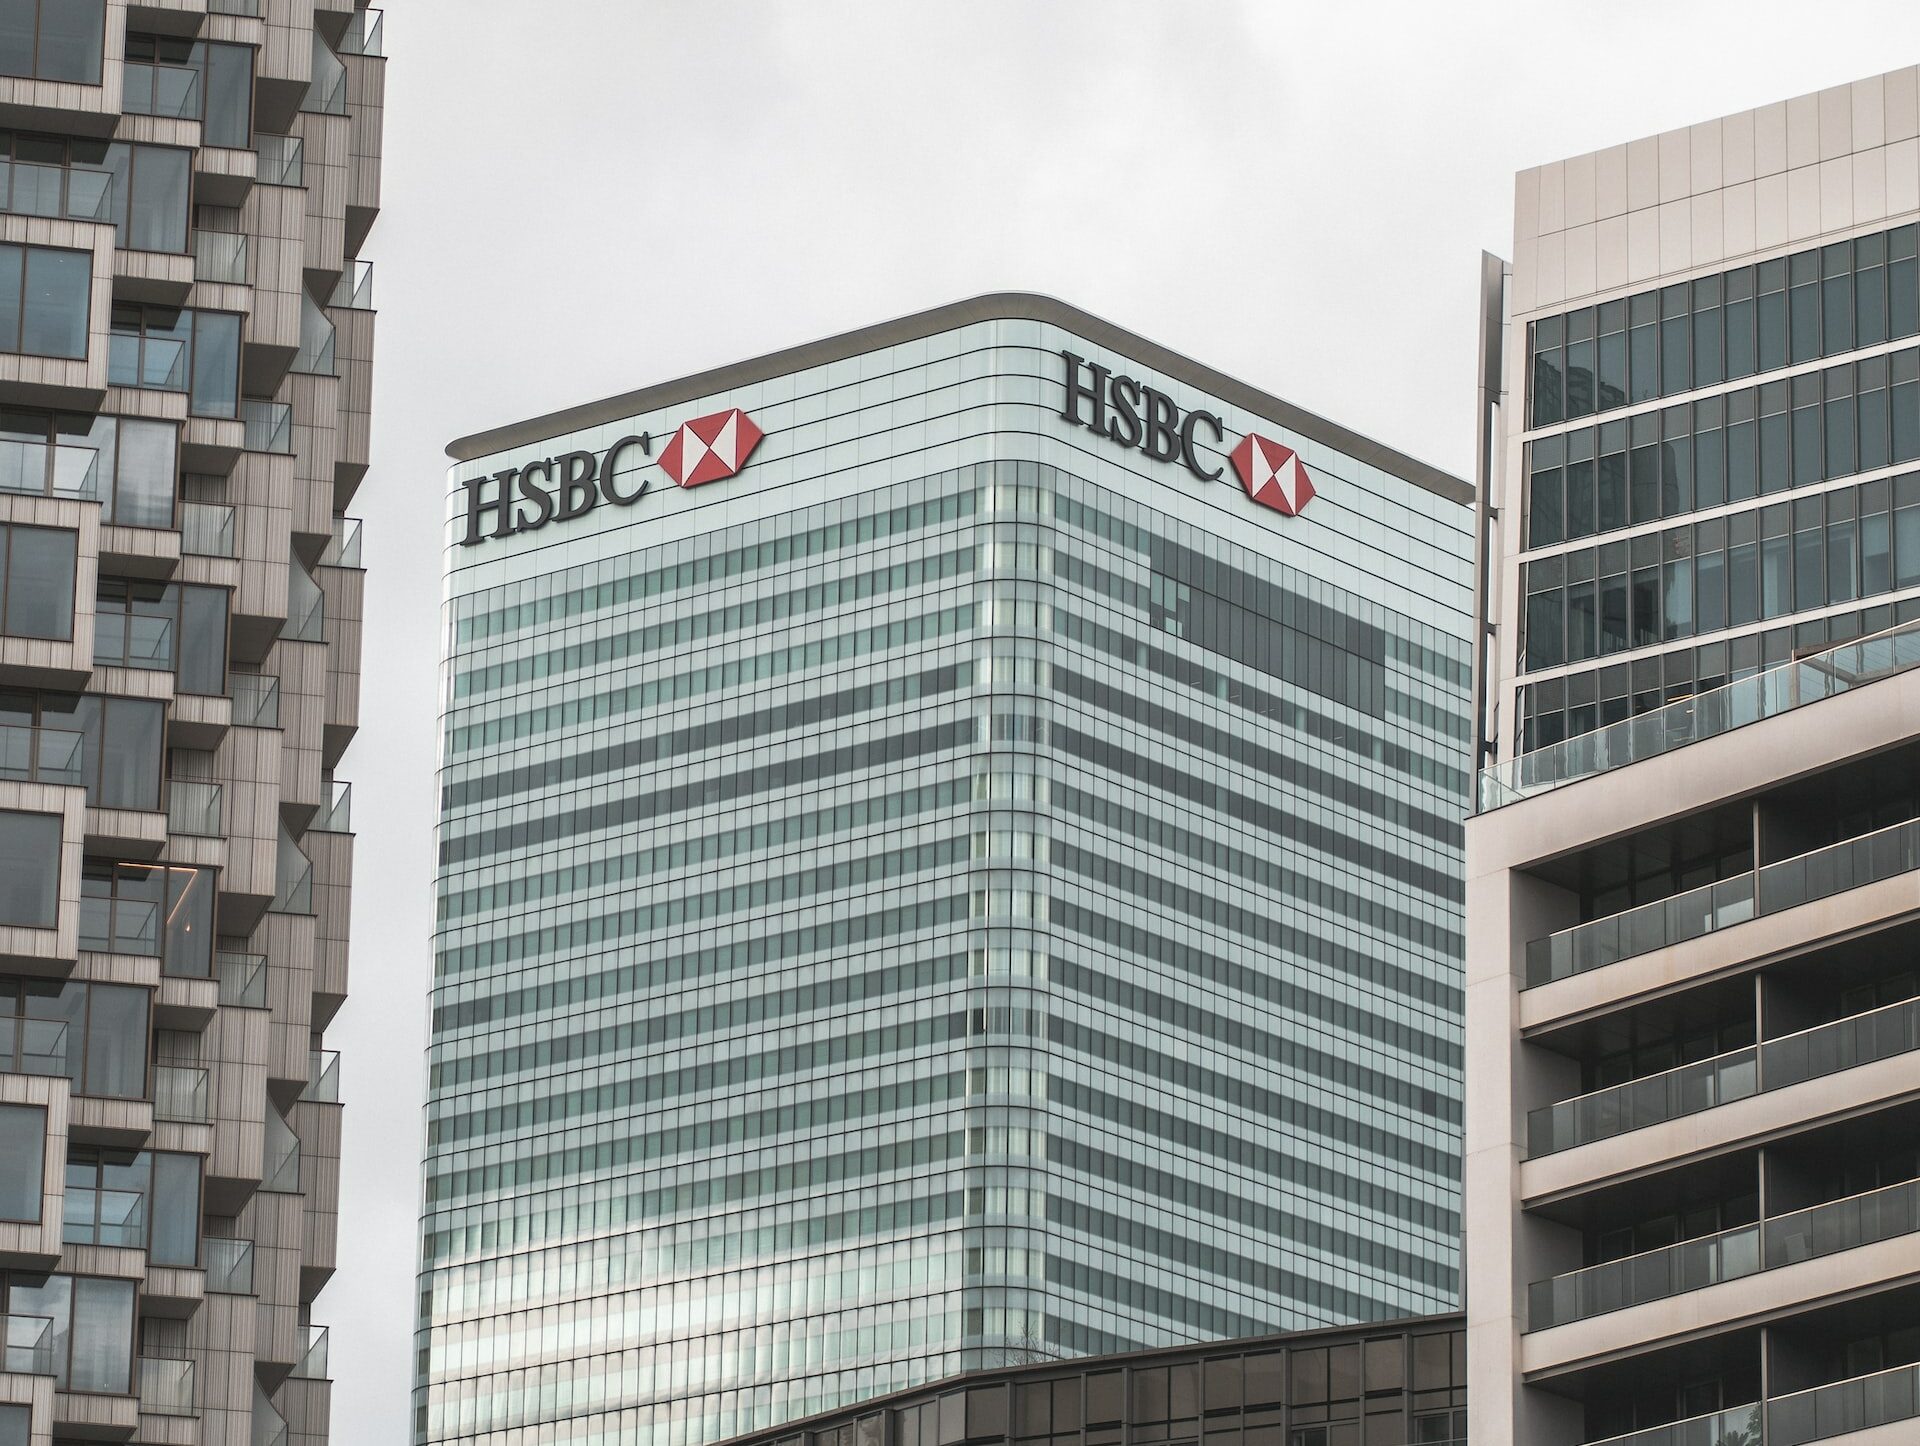 HSBC building | Oracle and HSBC